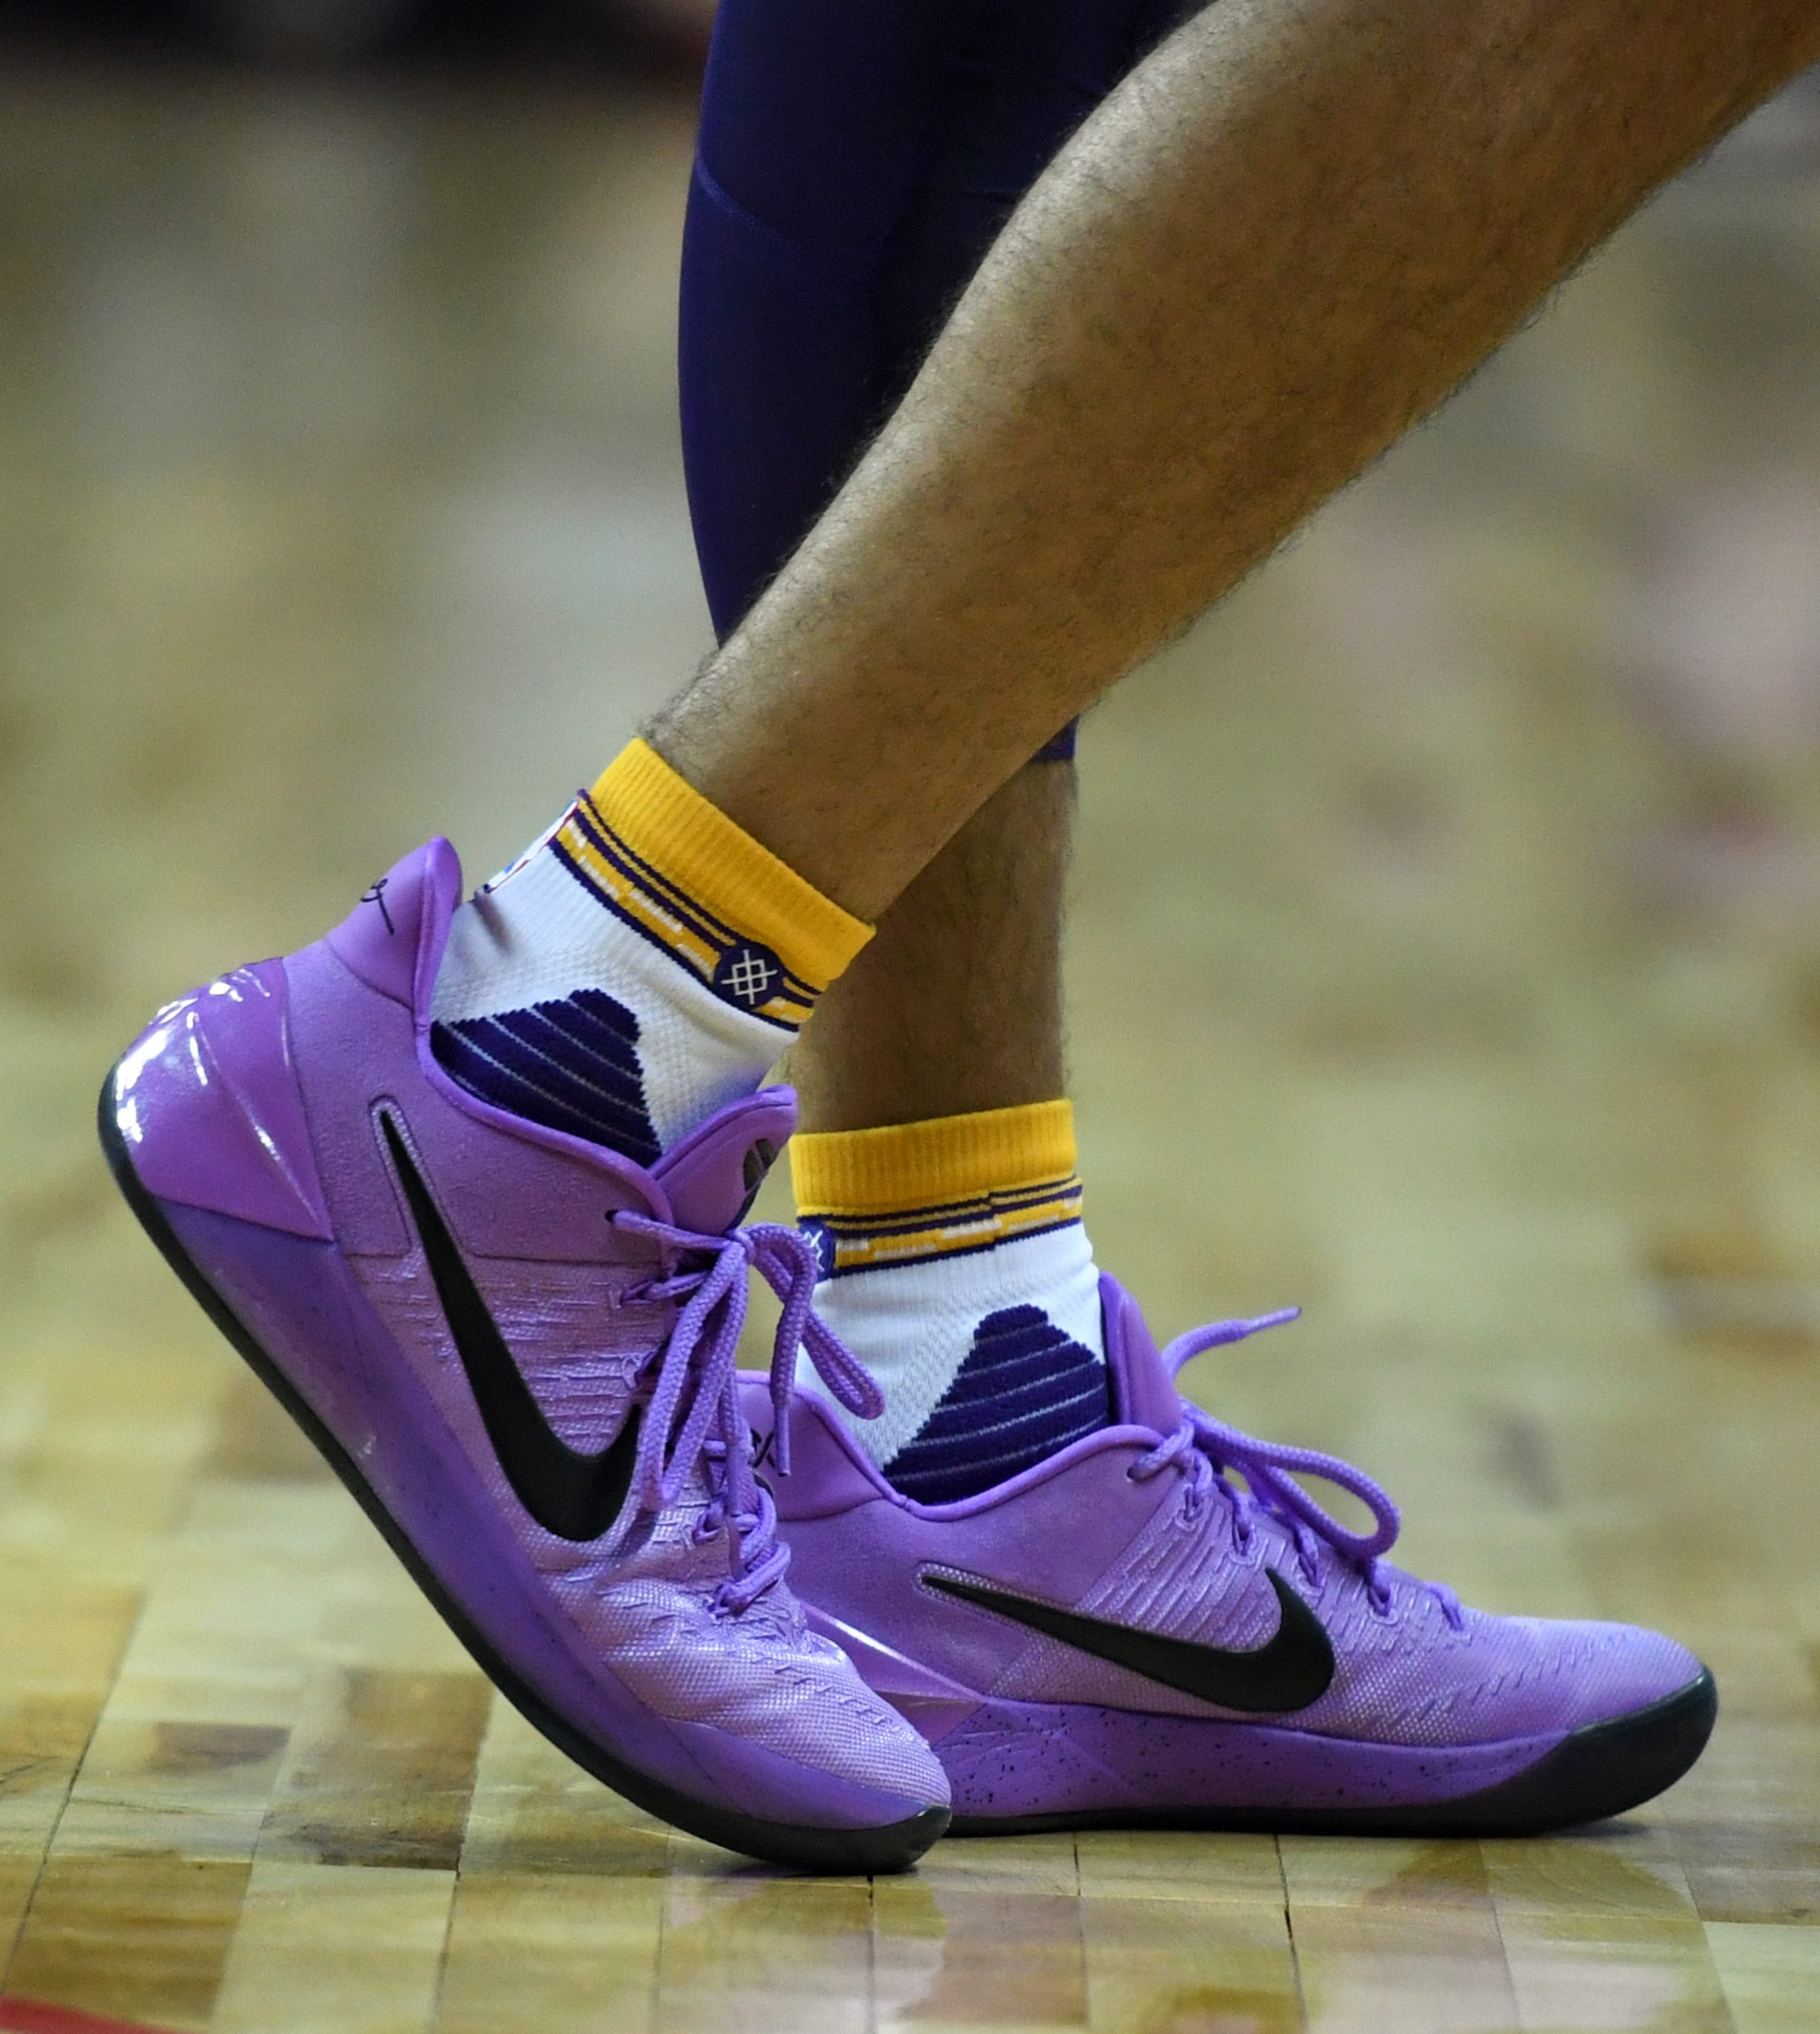 most worn shoes in nba